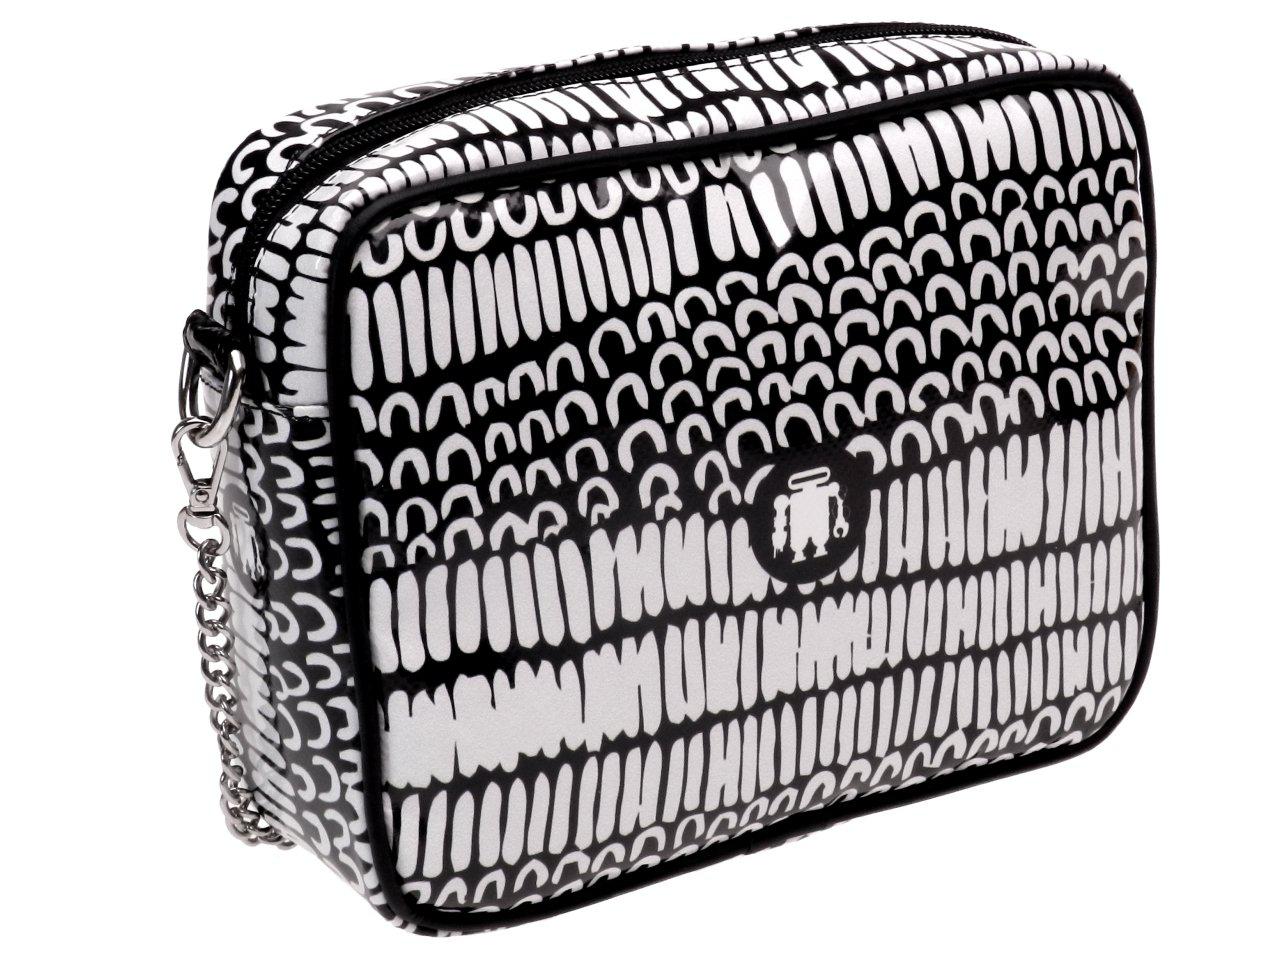 CLUTCH BLACK AND WHITE FANTASY. PARK MODEL MADE OF LORRY TARPAULIN. - Limited Edition Paul Meccanico